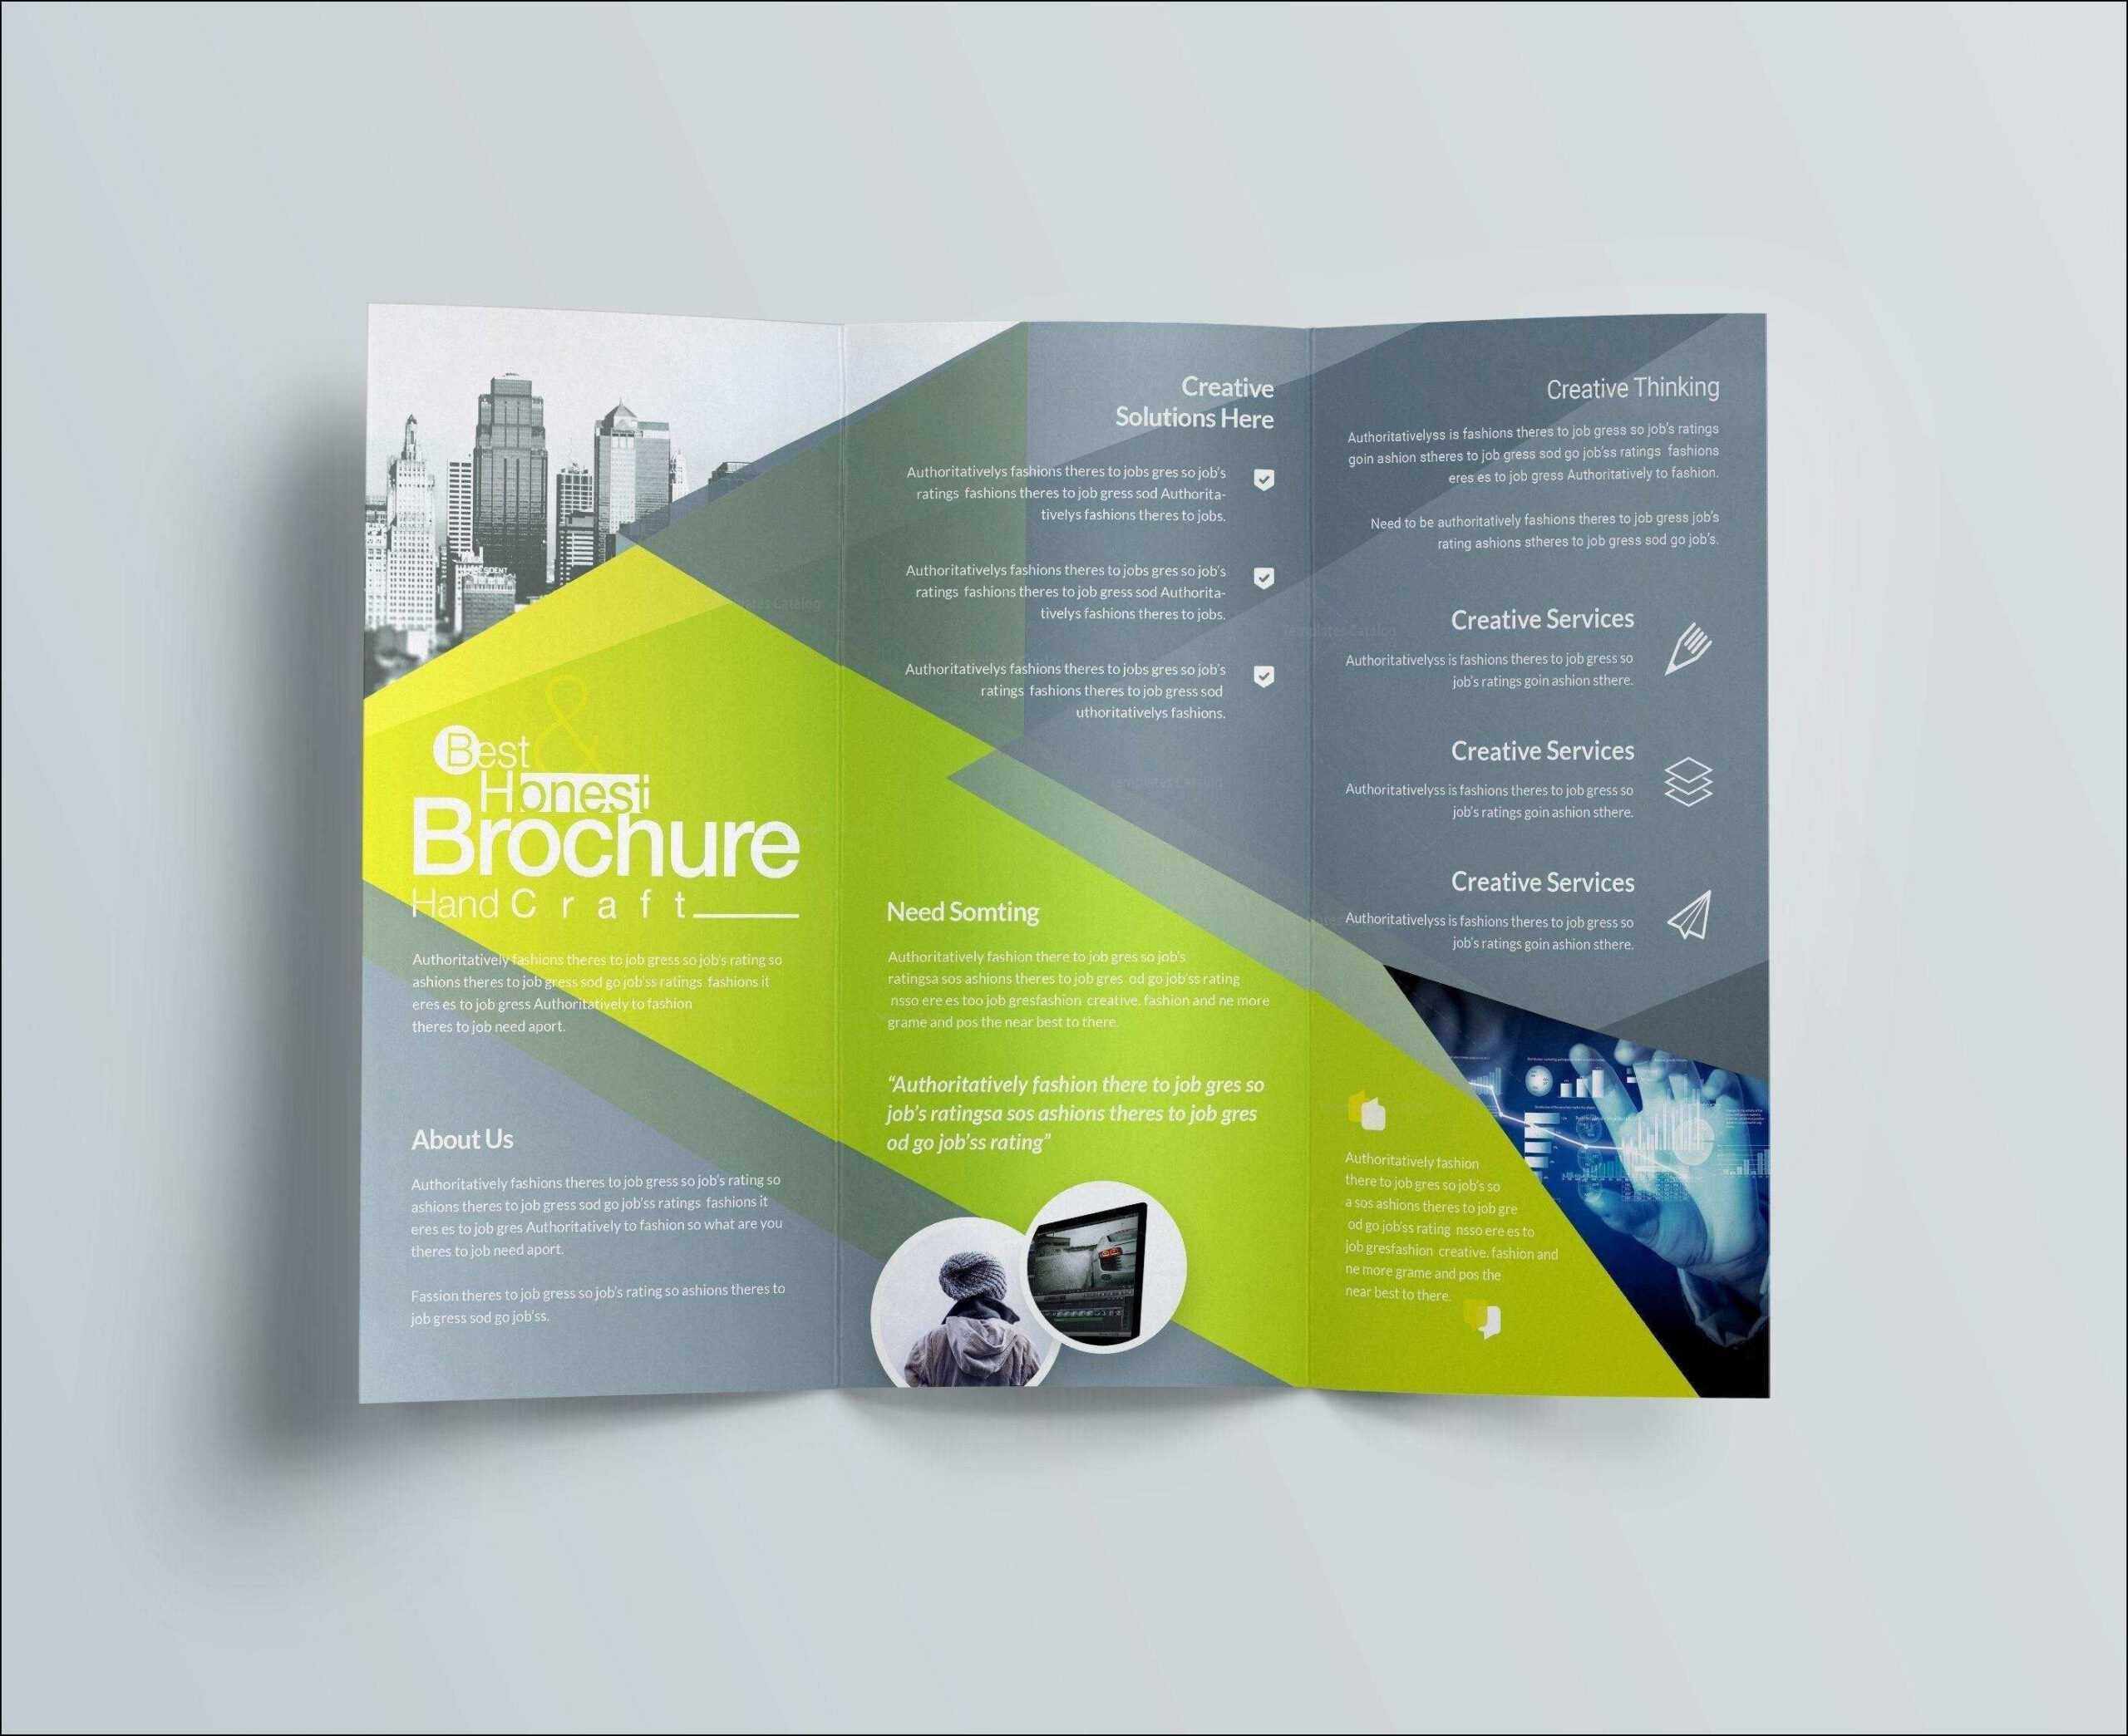 Booklet Template Publisher